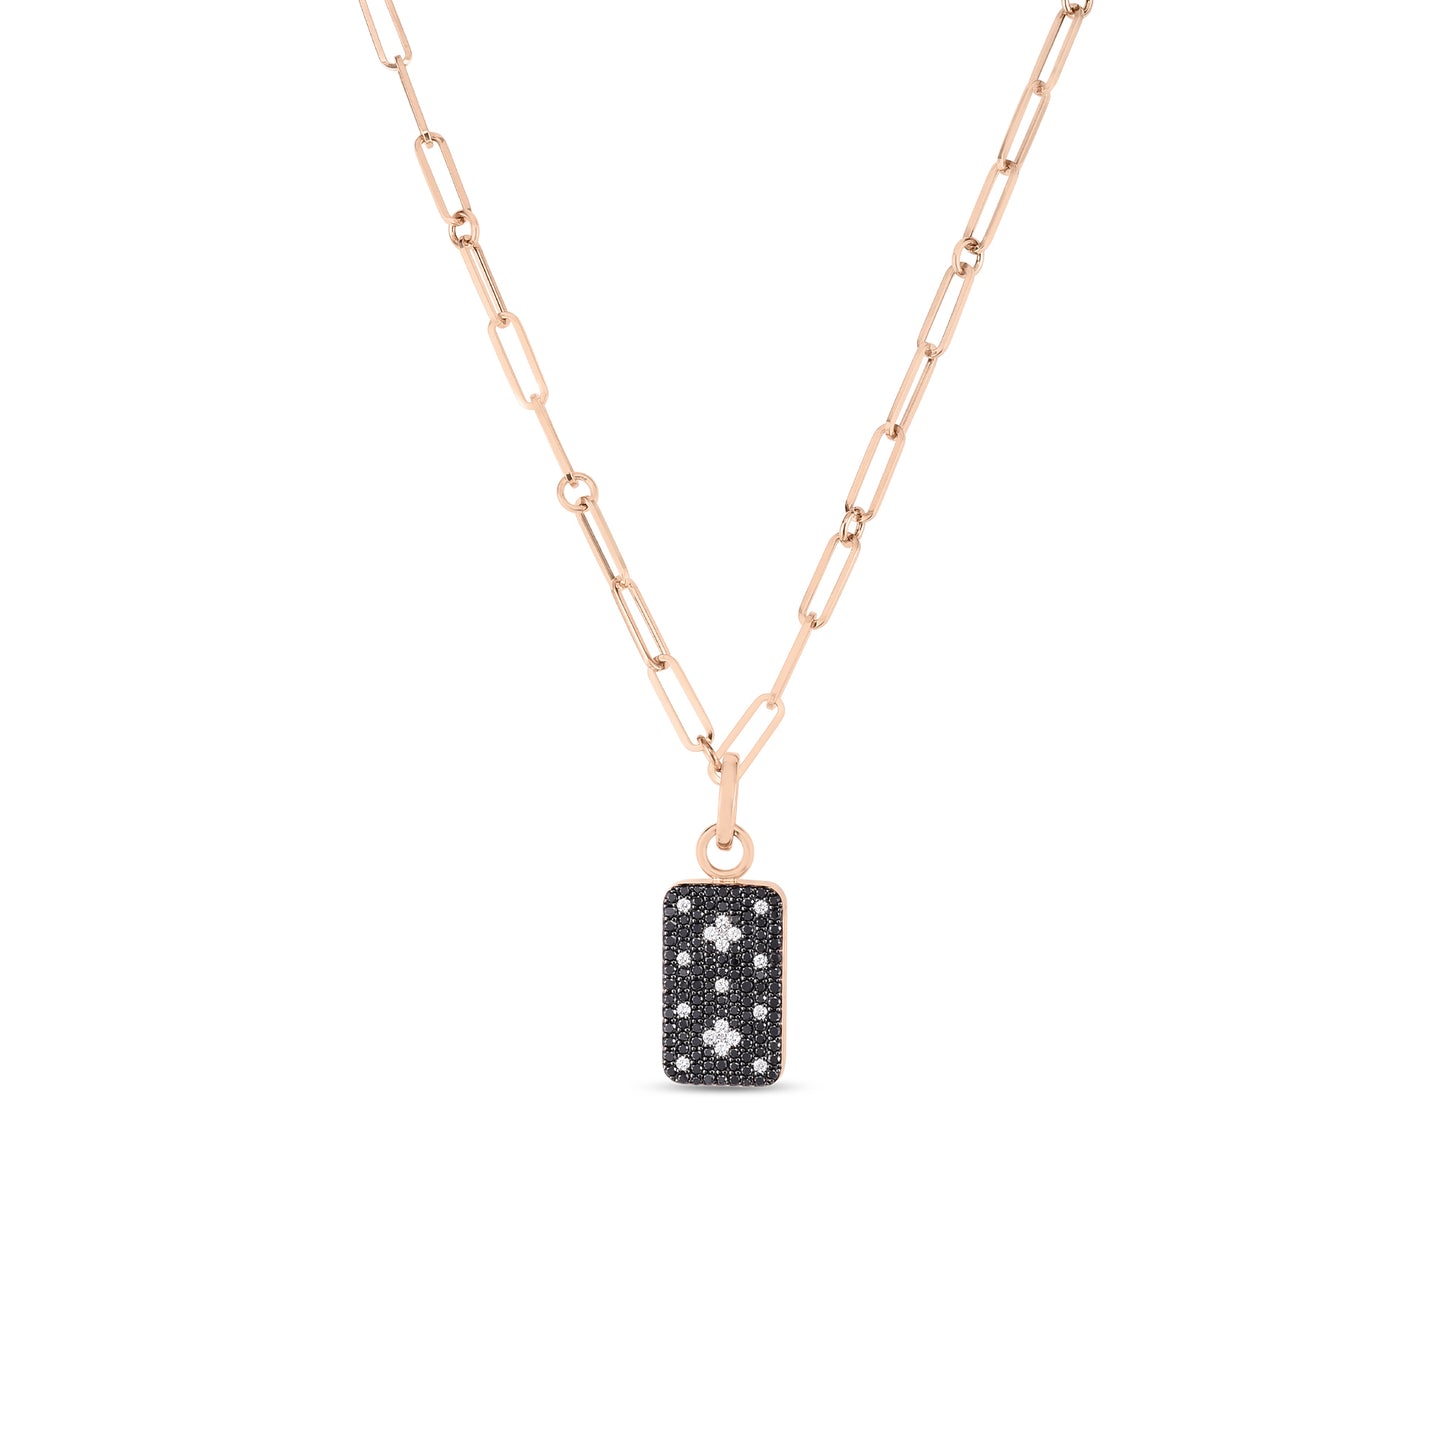 Roberto Coin 18K Gold with Black and White Diamonds Venetian Princess Dog Tag Necklace